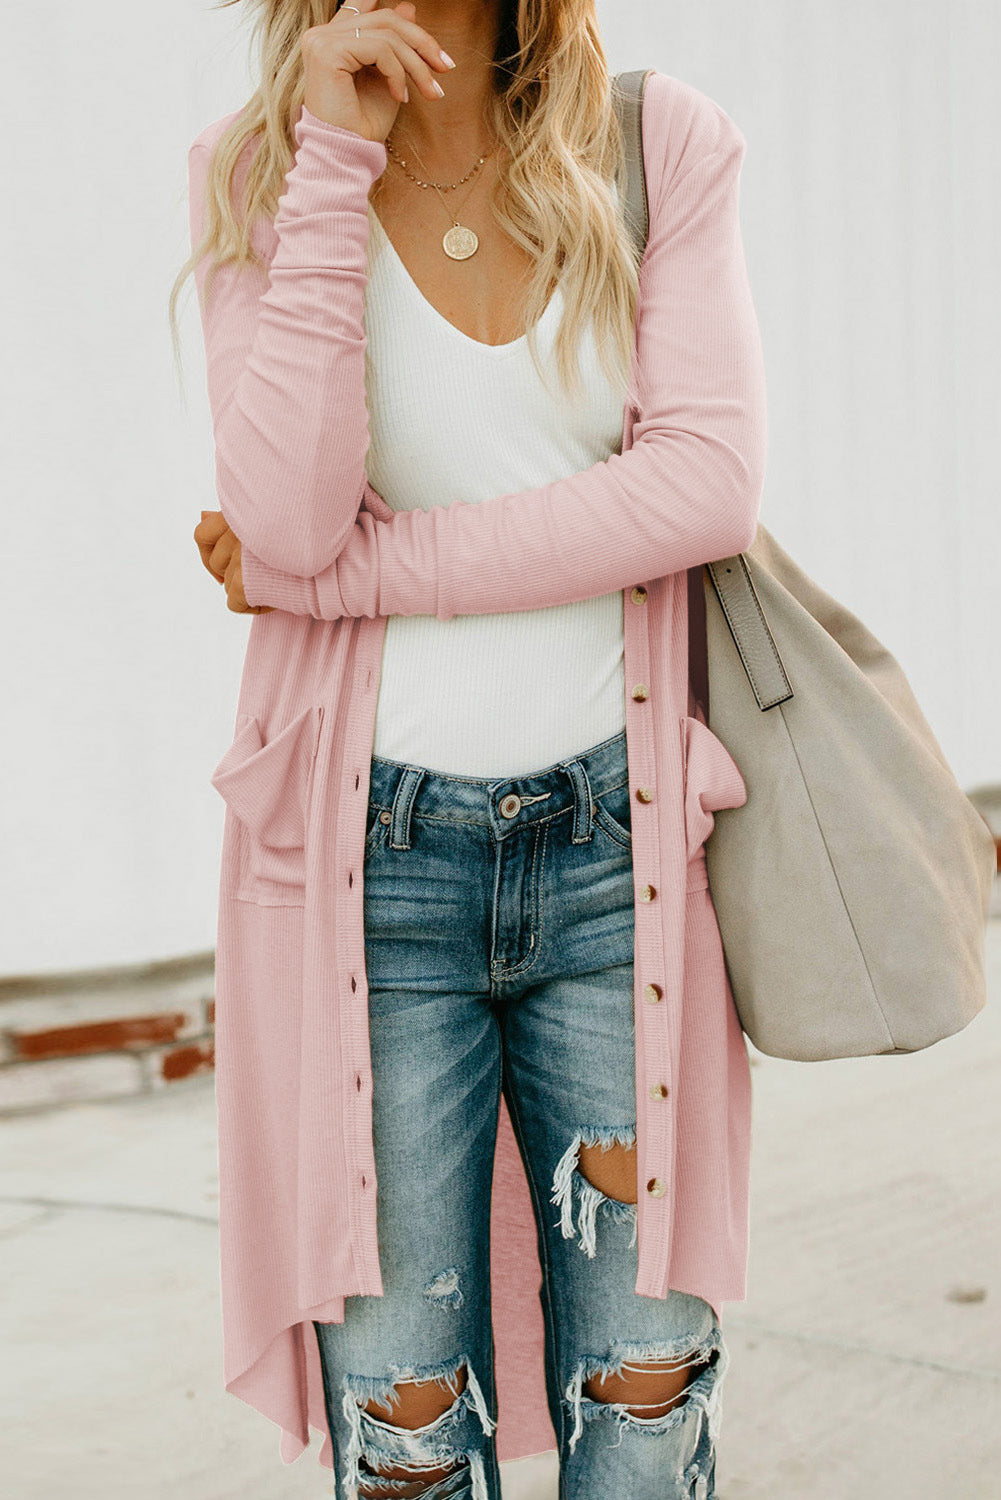 V-Neck Long Sleeve Cardigan with Pocket - Pink / S - Women’s Clothing & Accessories - Shirts & Tops - 17 - 2024